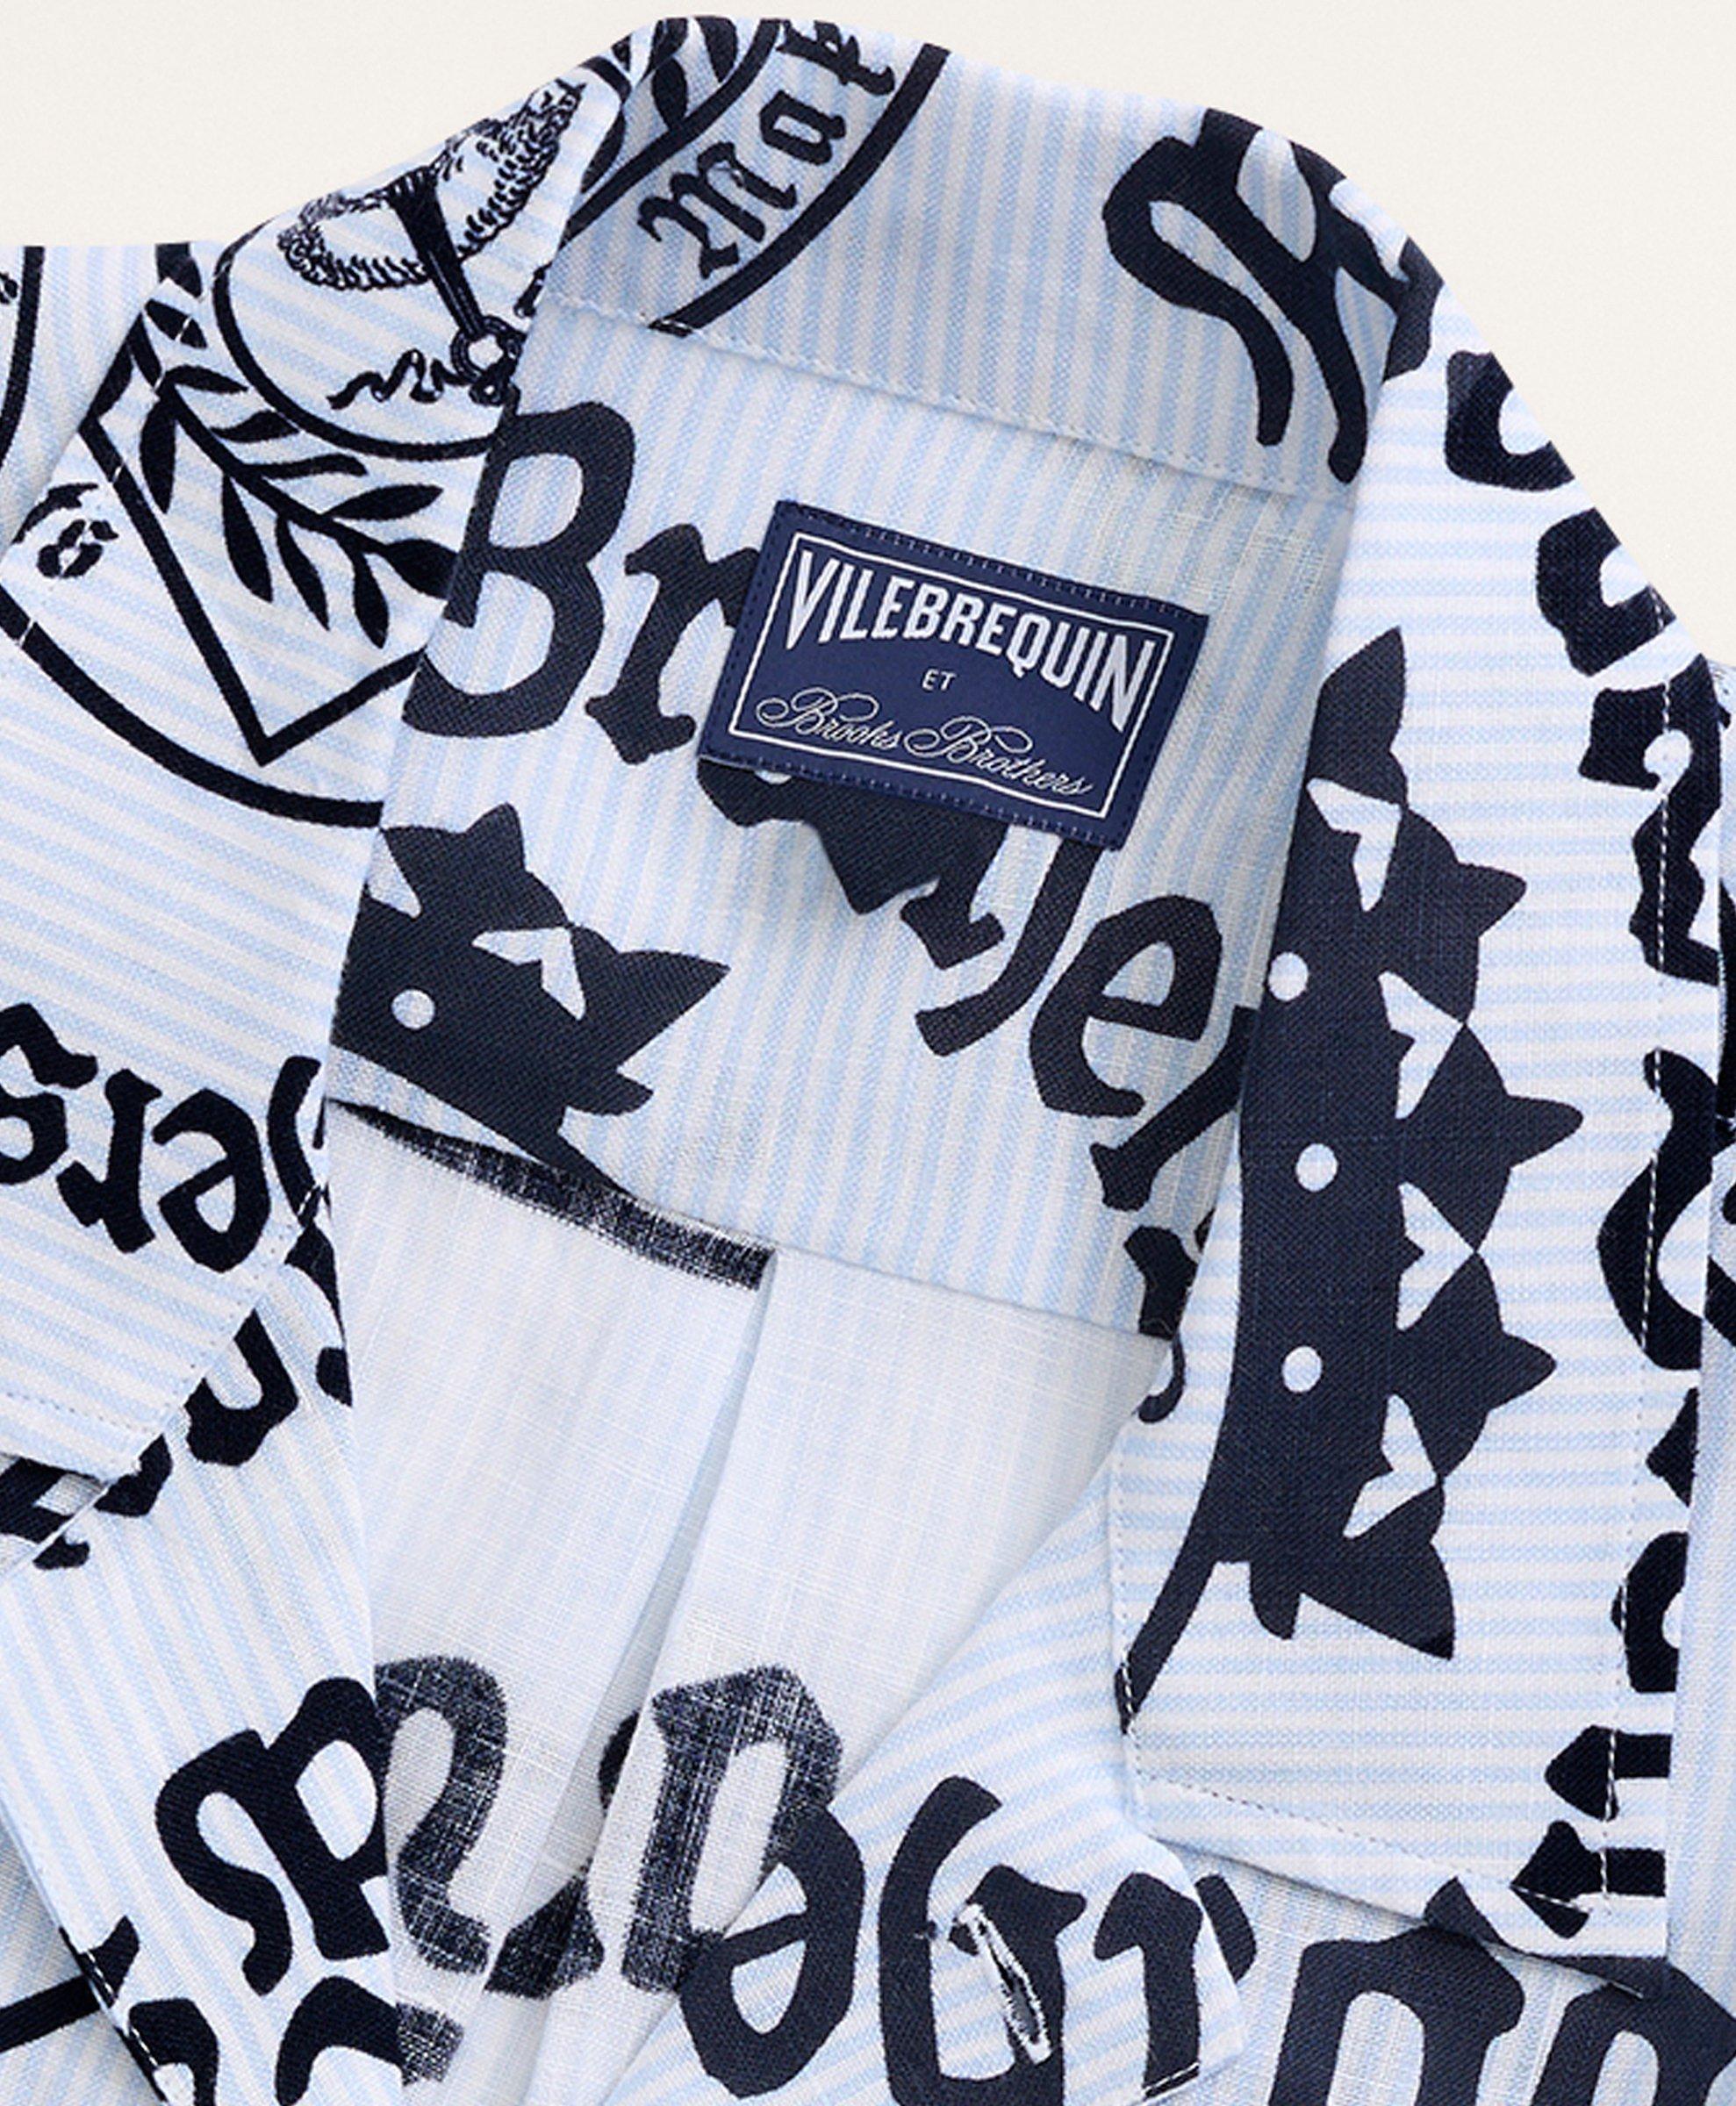 Brooks Brothers Et Vilebrequin Bowling Shirt in the Seal of Approval Print